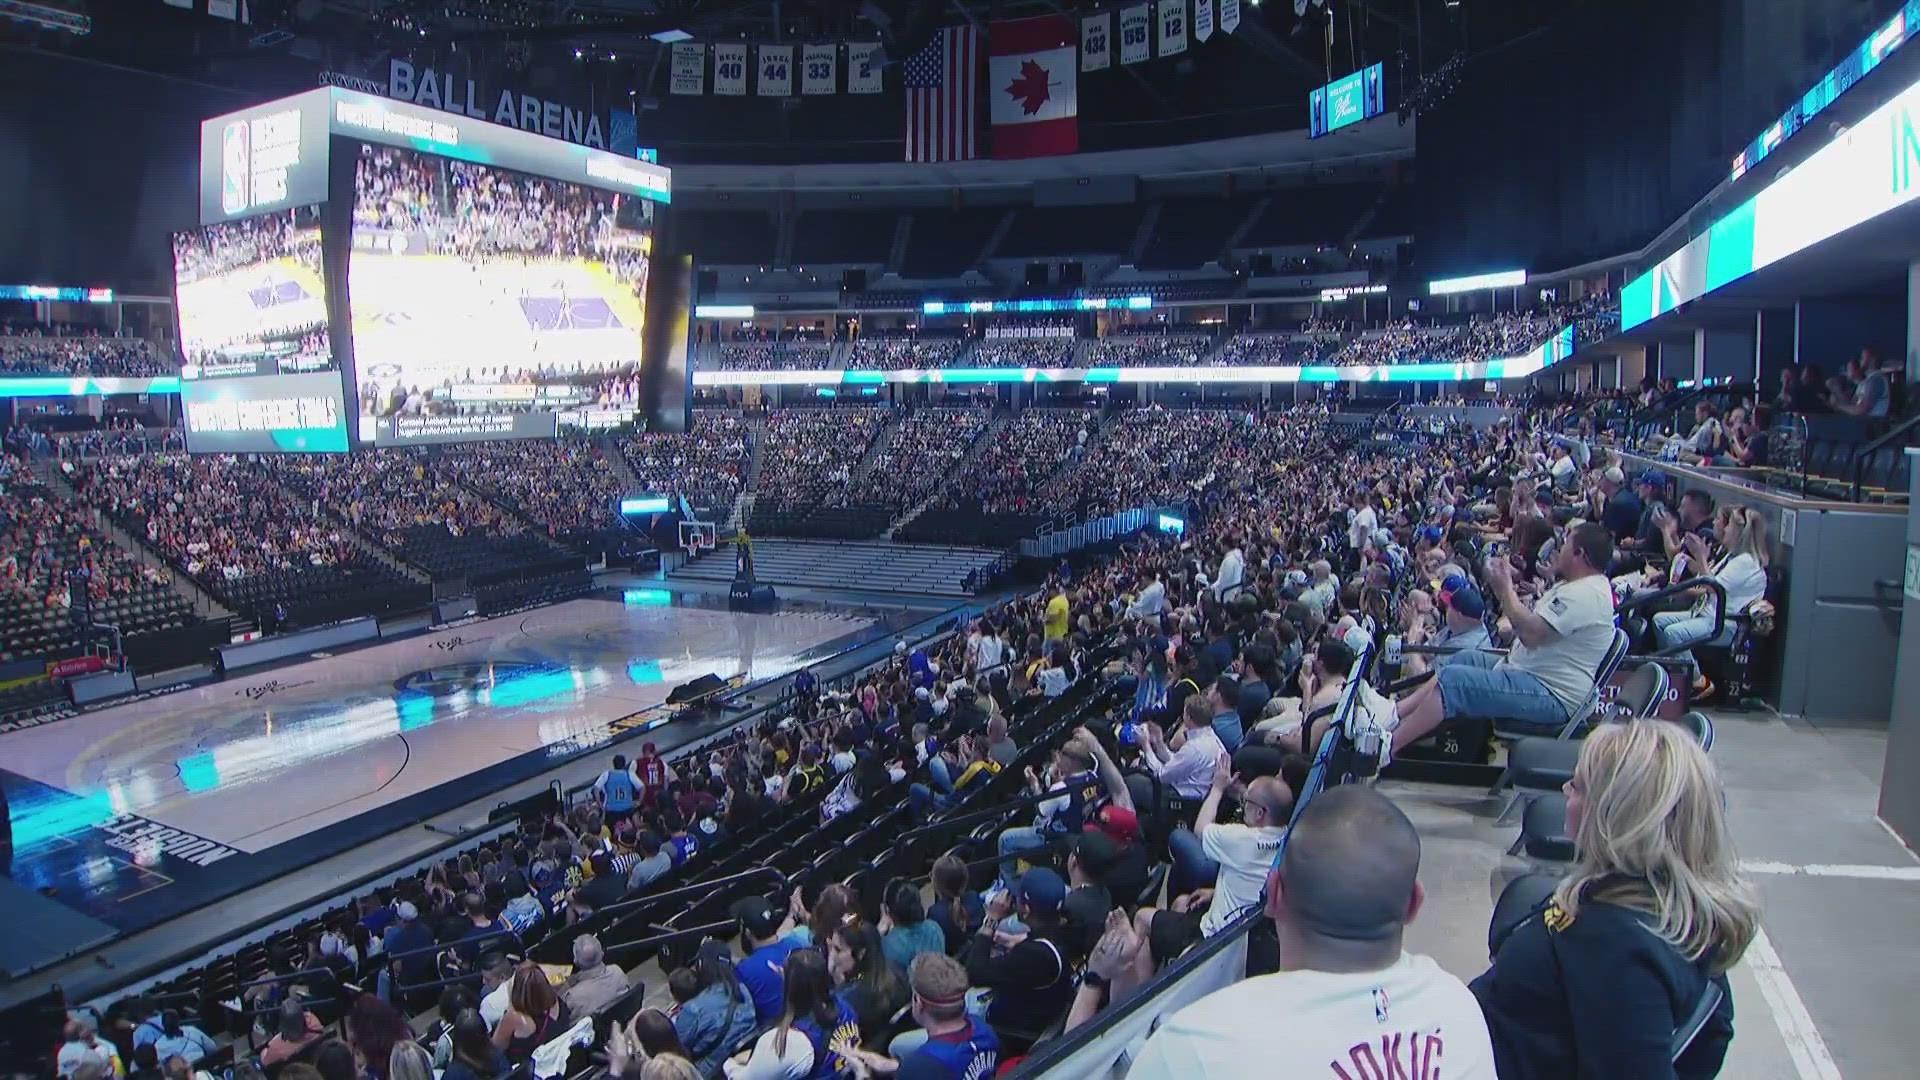 The game was in Los Angeles, but fans took their seats at Ball Arena for the big watch party.